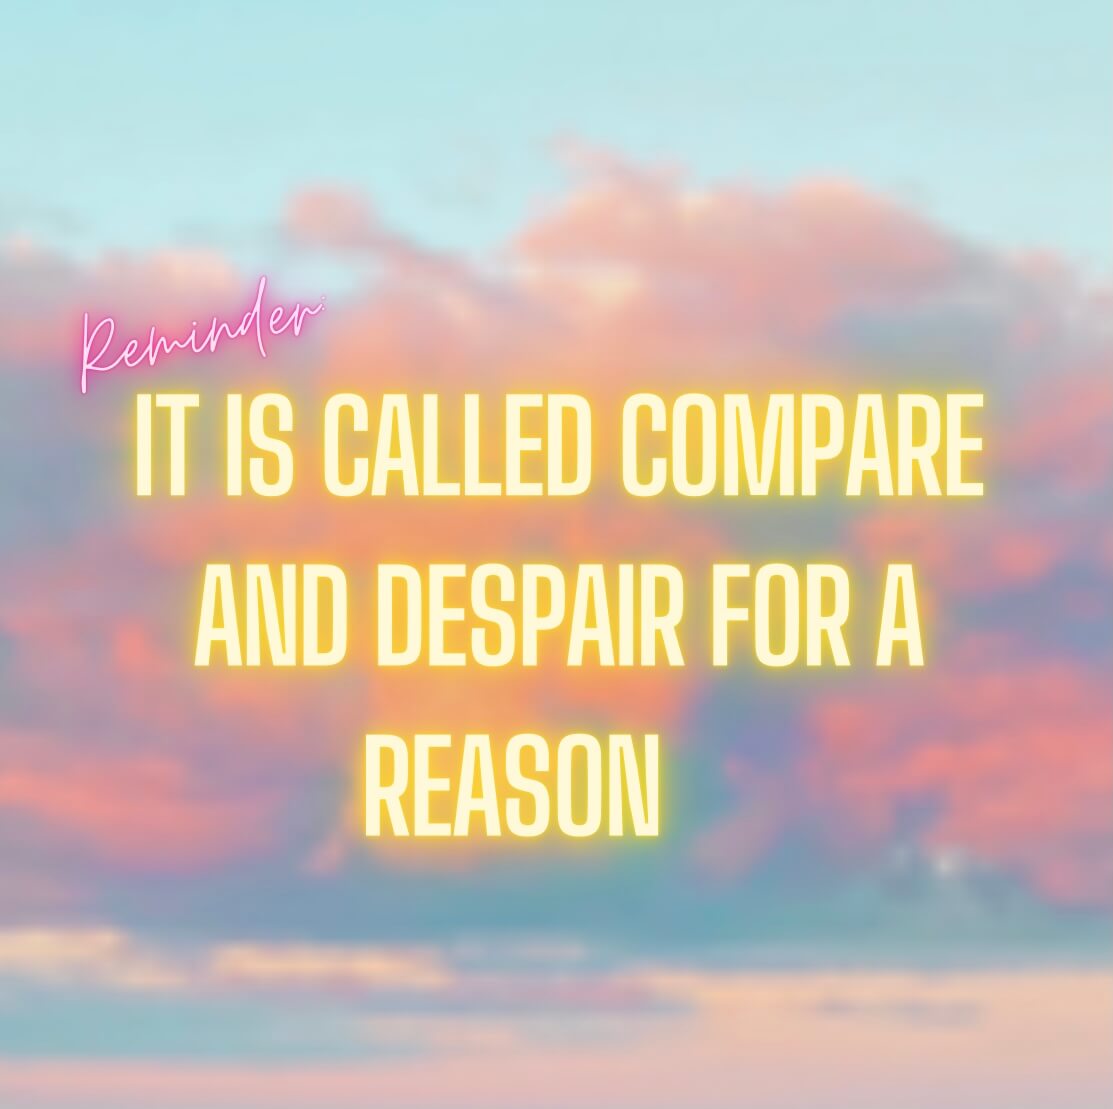 Word Art Image That Says "Reminder: It is called compare and despair for a reason"